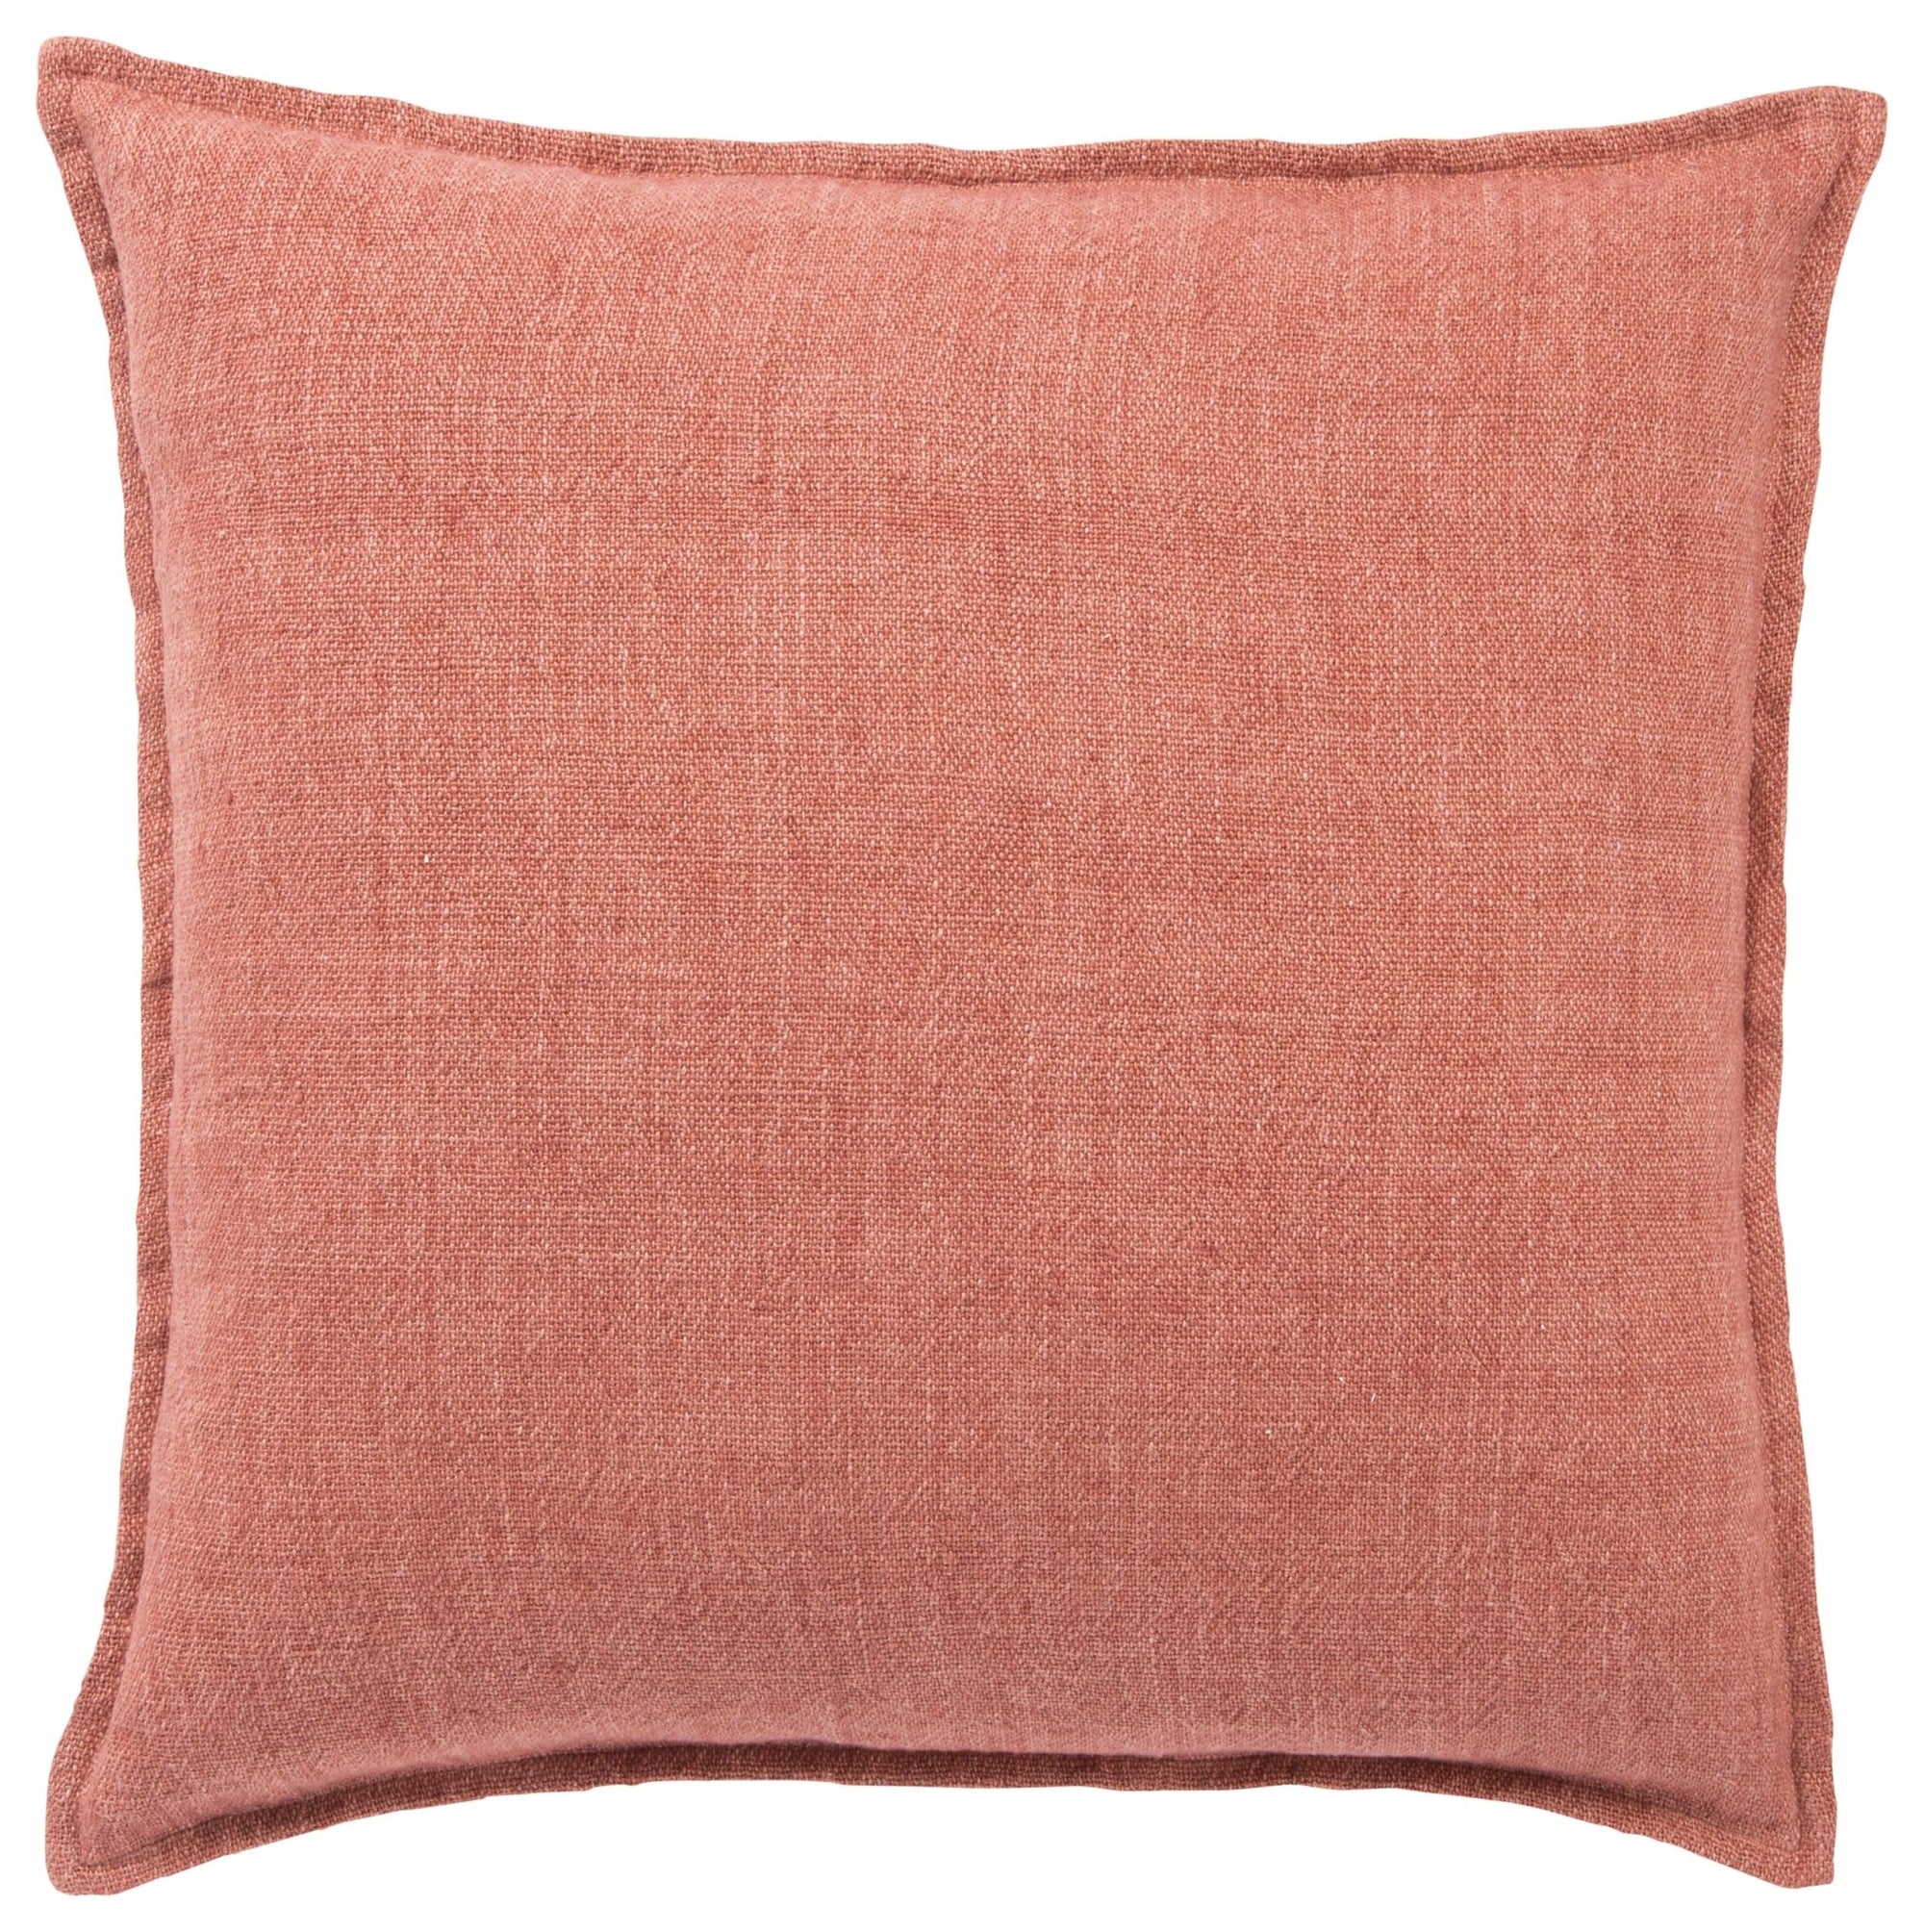 Burbank Brb01 Blanche Red Pillow - Rug & Home